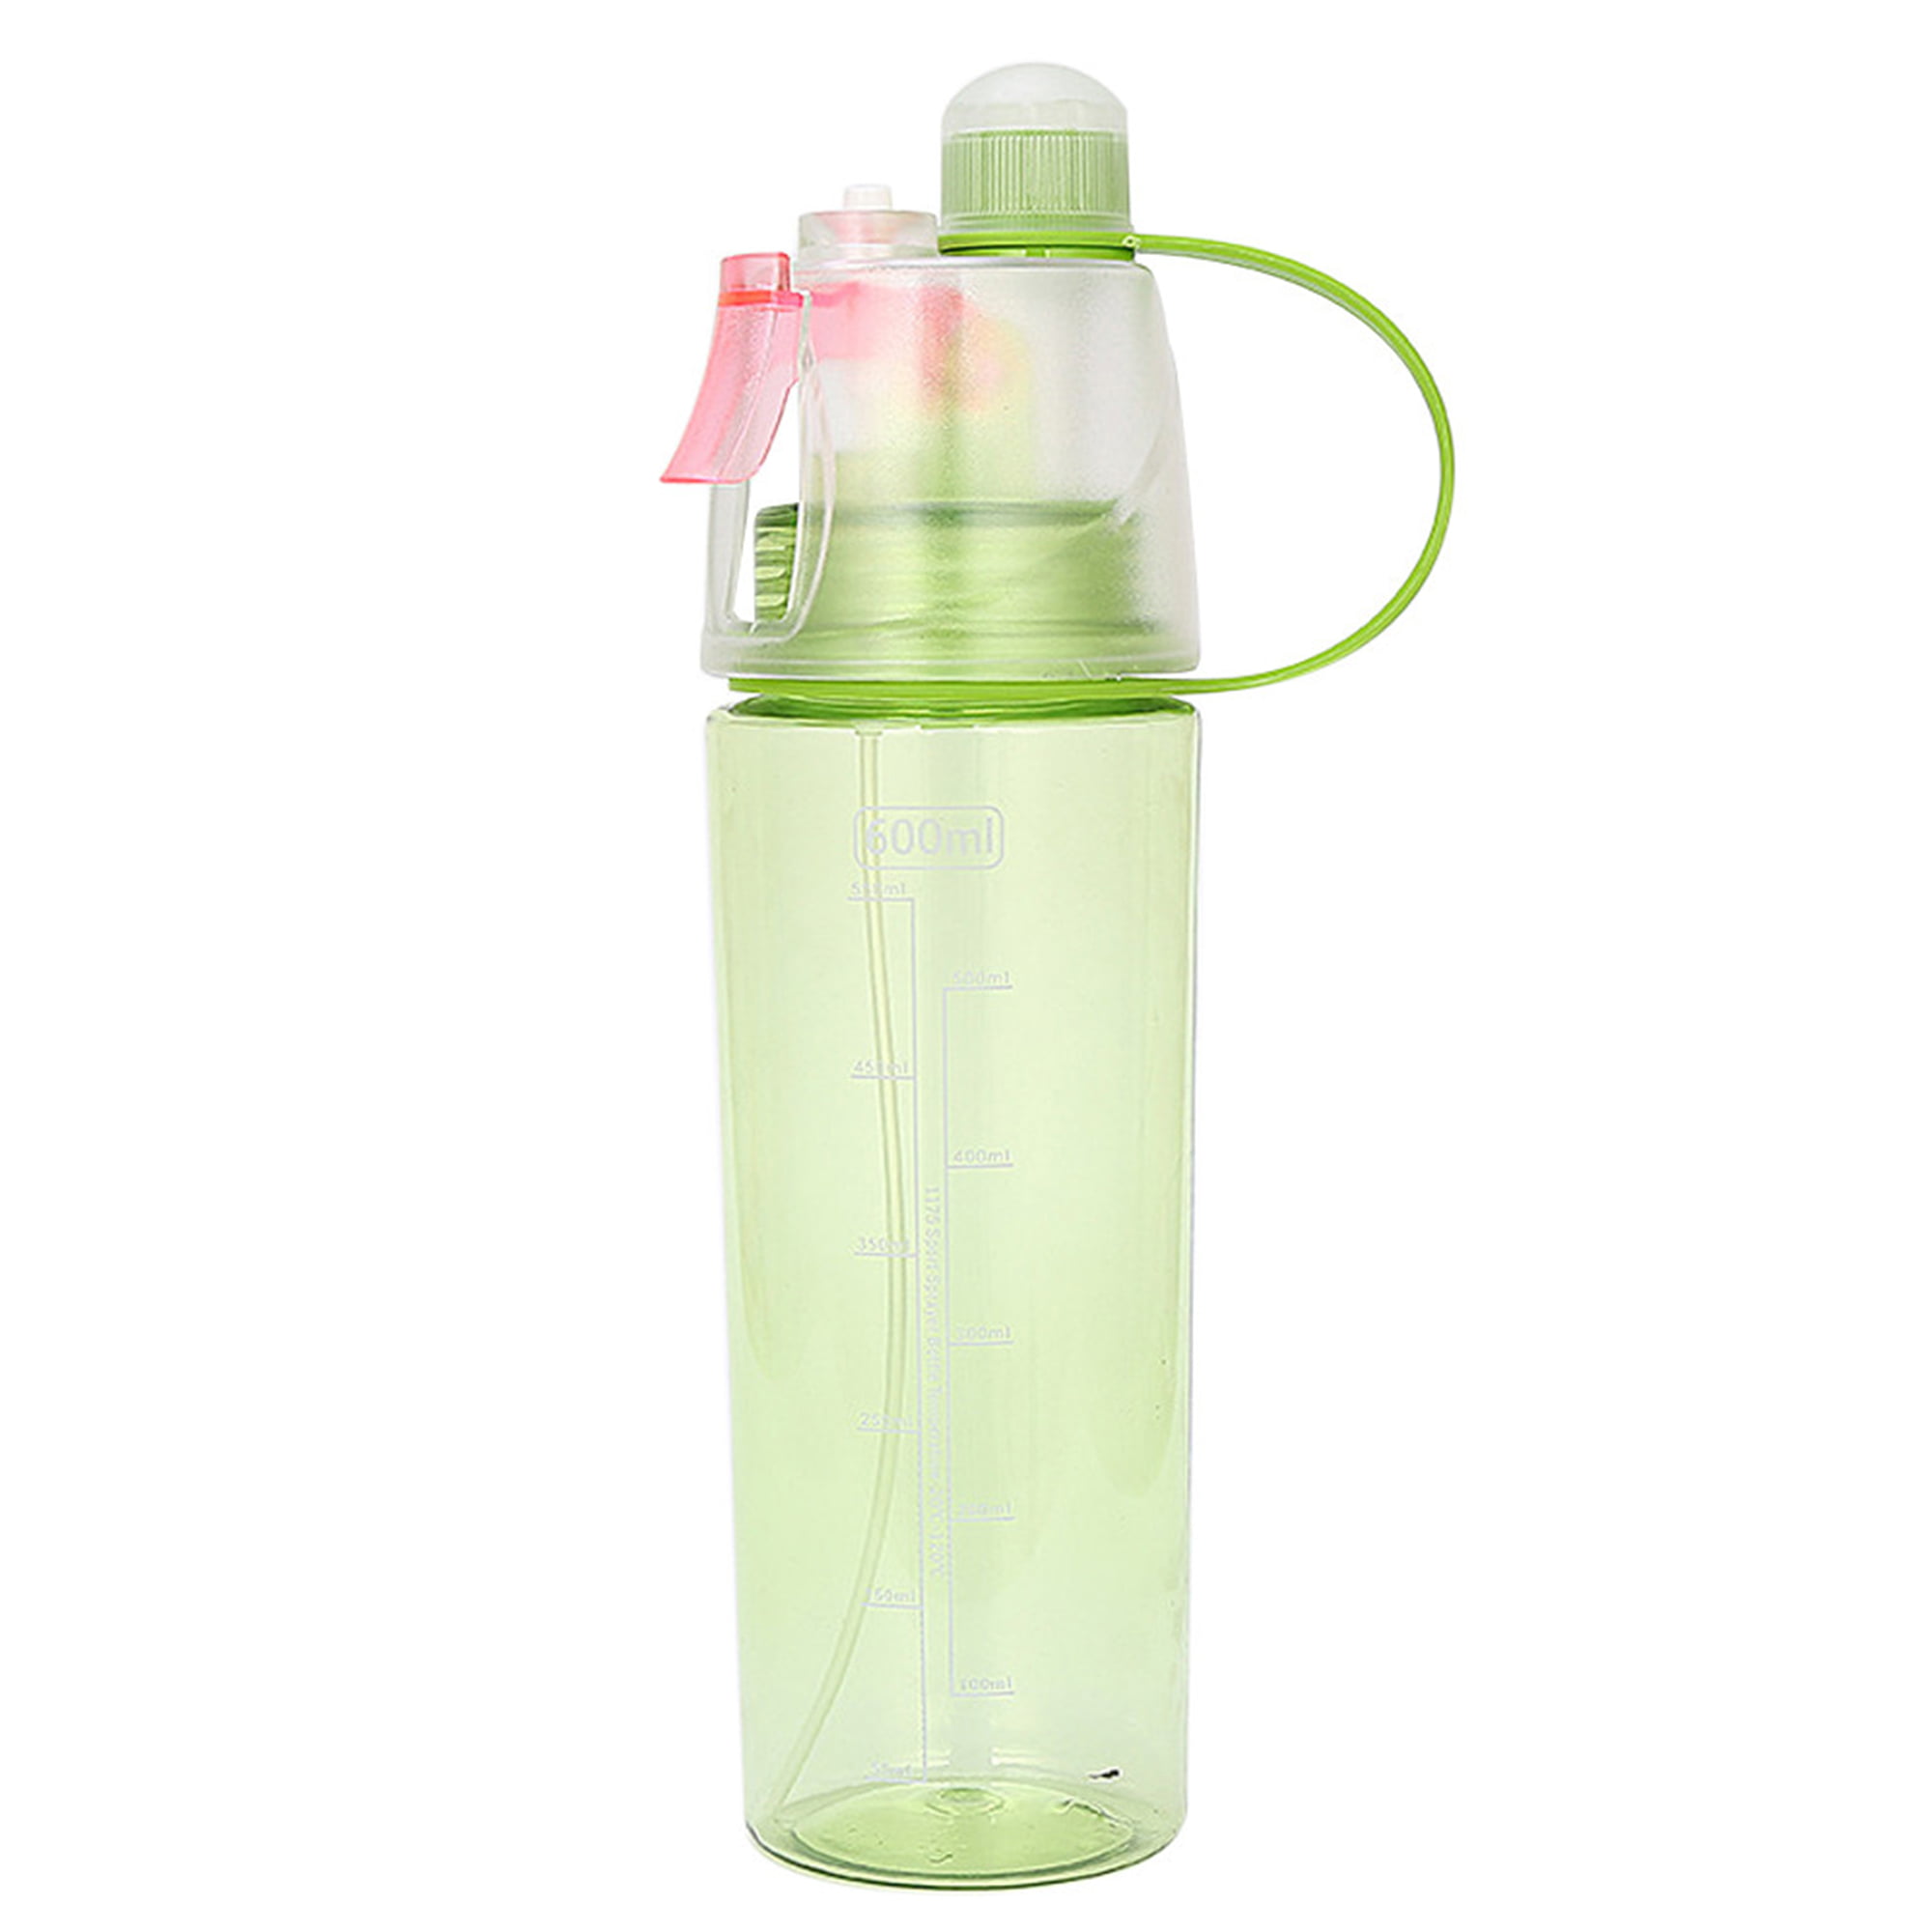 Motivational Water Bottle with Time Marker & Straw 32oz Spray Sports Water Bottle with Spray Mist Leakproof Tritran BPA Free Drink Water Bottle Reminder for Fitness,Gym and Outdoor Sports Green Blue